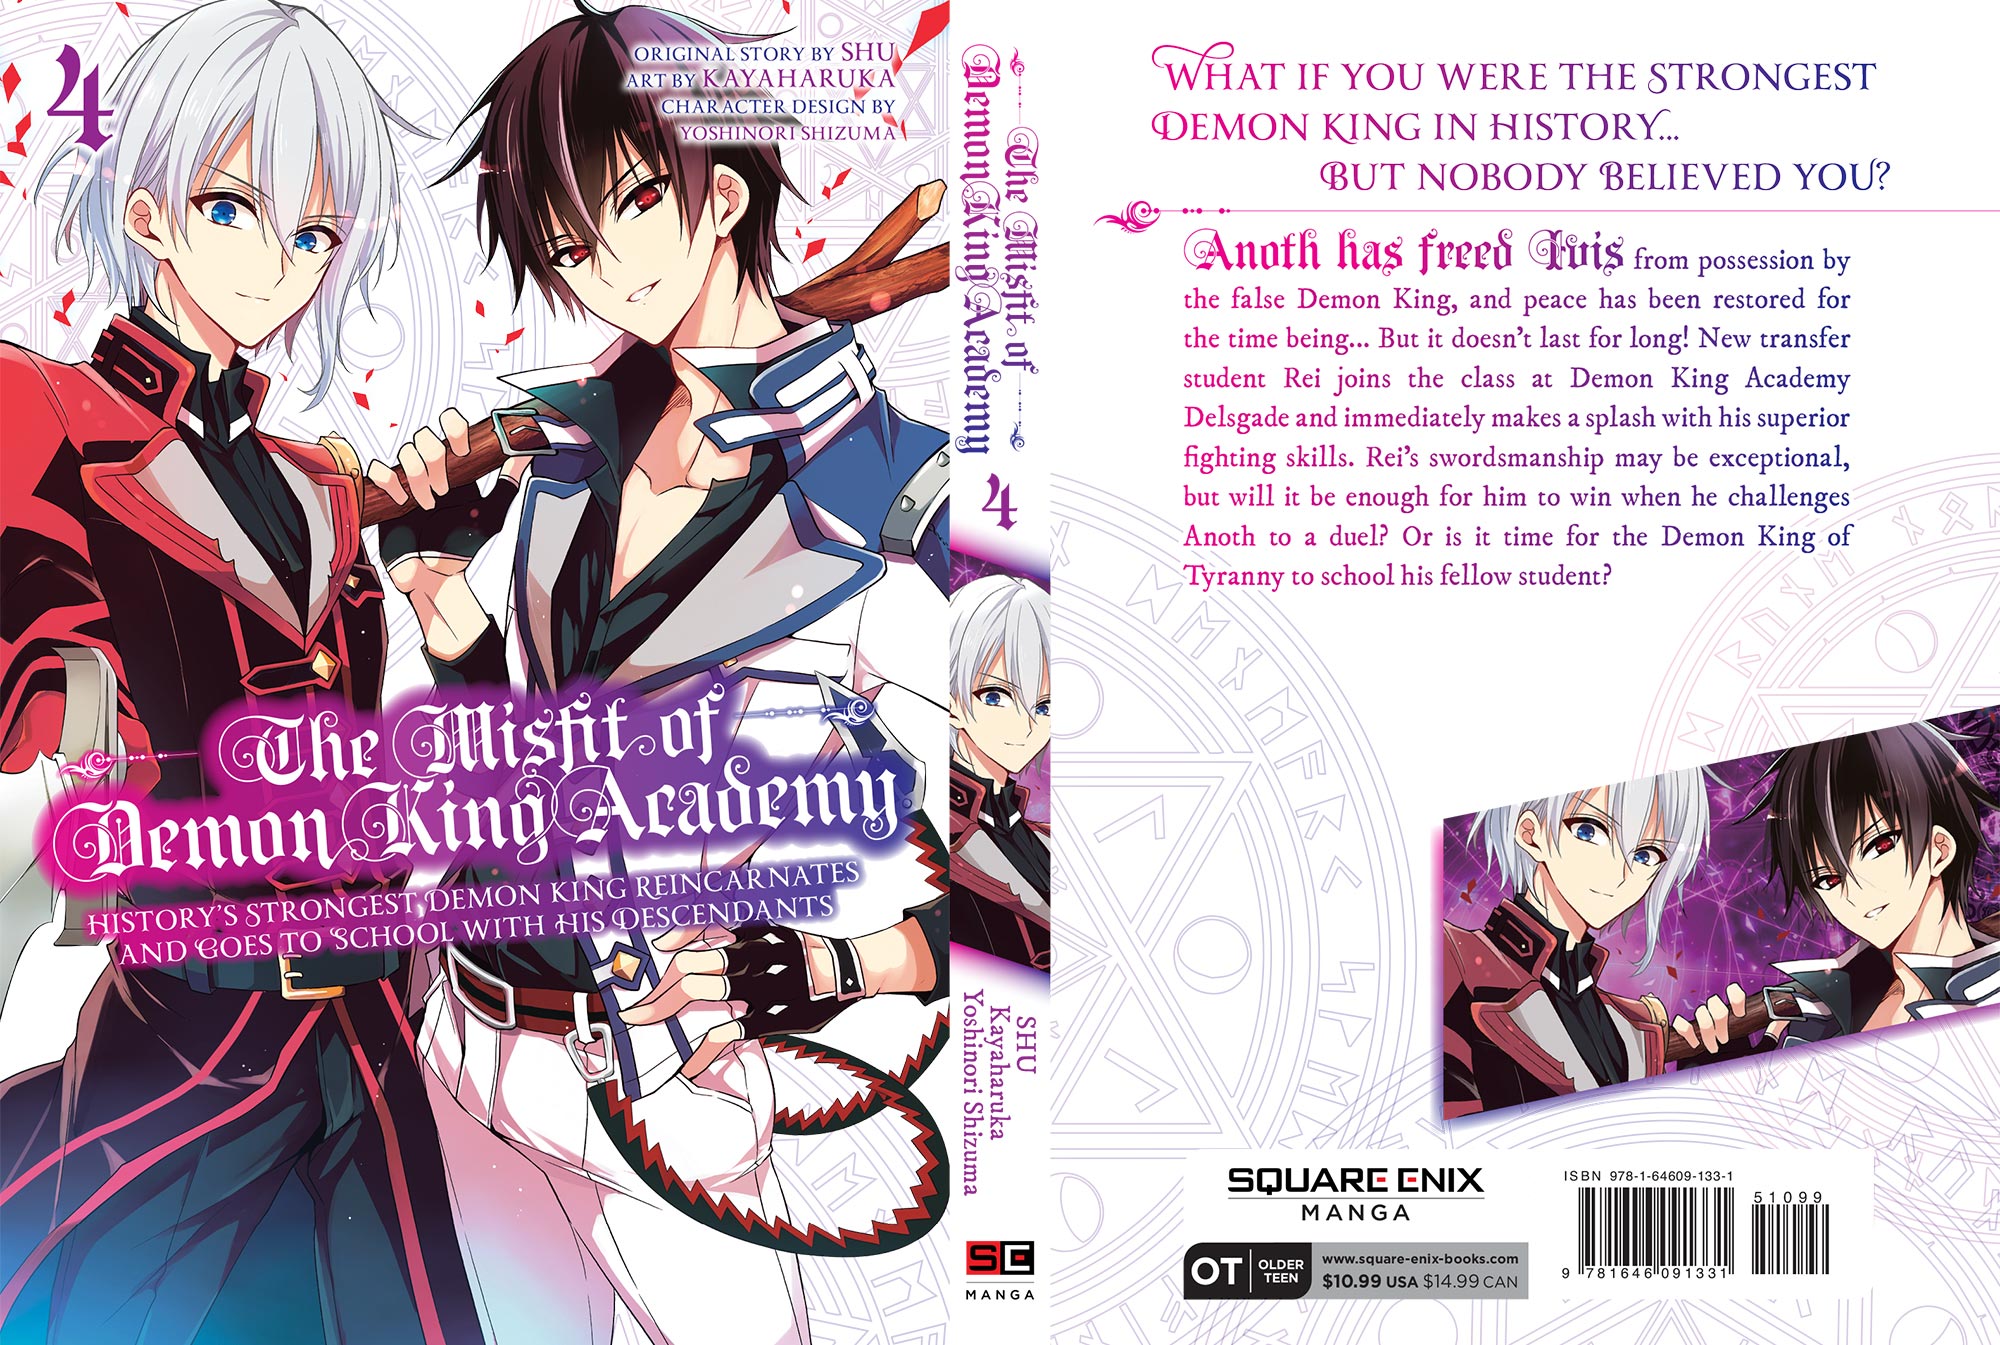 The Misfit of Demon King Academy Vol 4 Jacket Cover